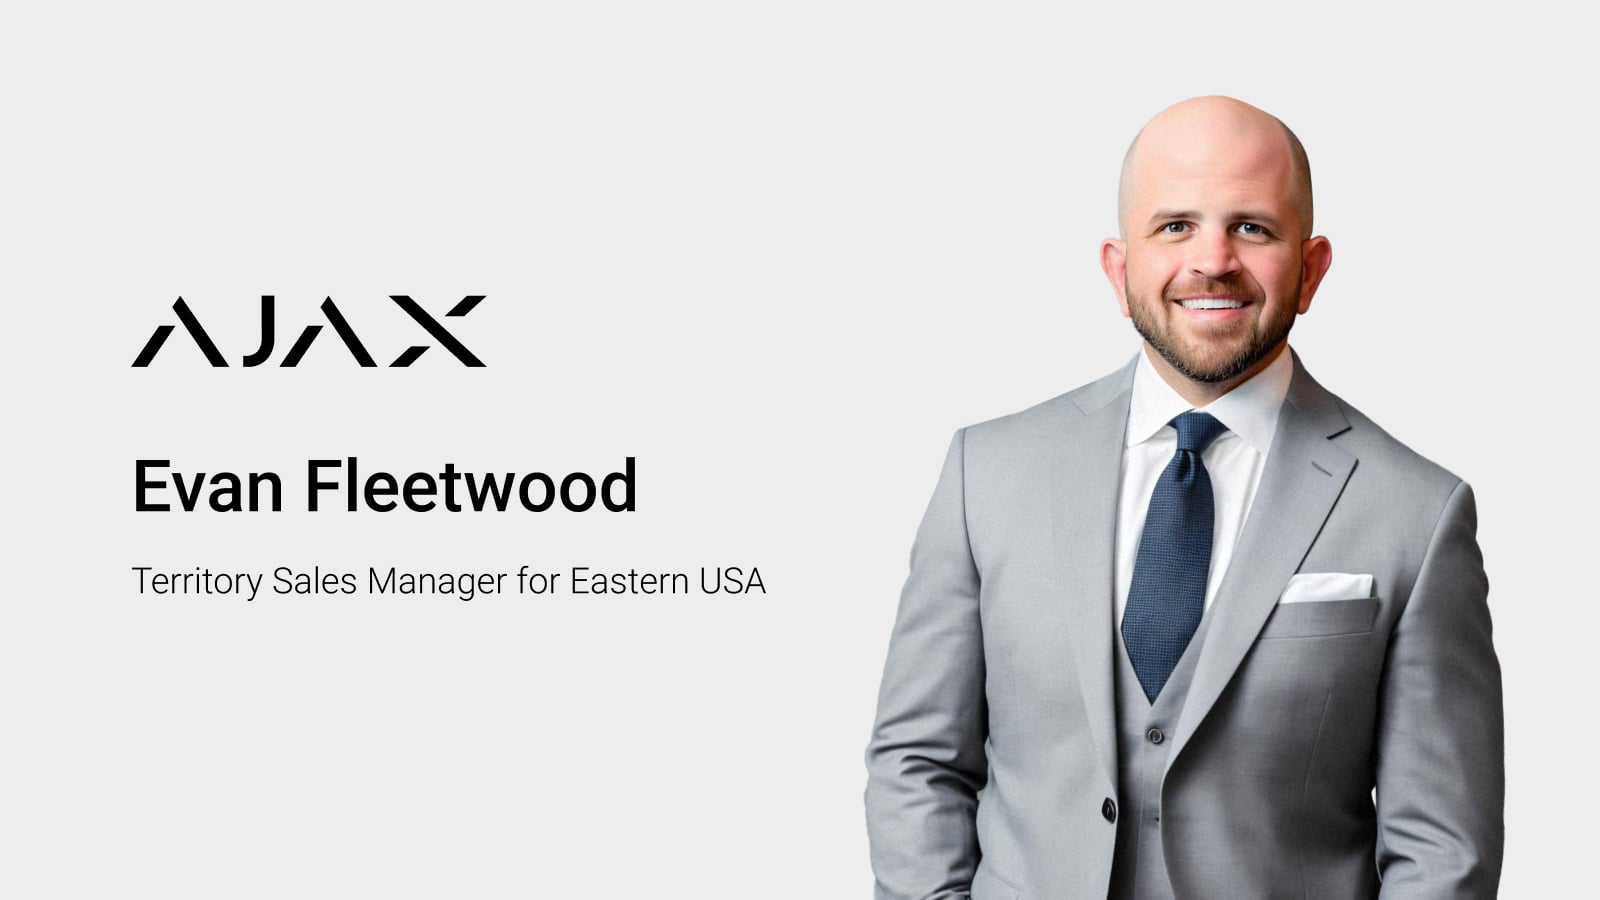 Ajax Systems welcomes Evan Fleetwood as Territory Sales Manager for Eastern USA